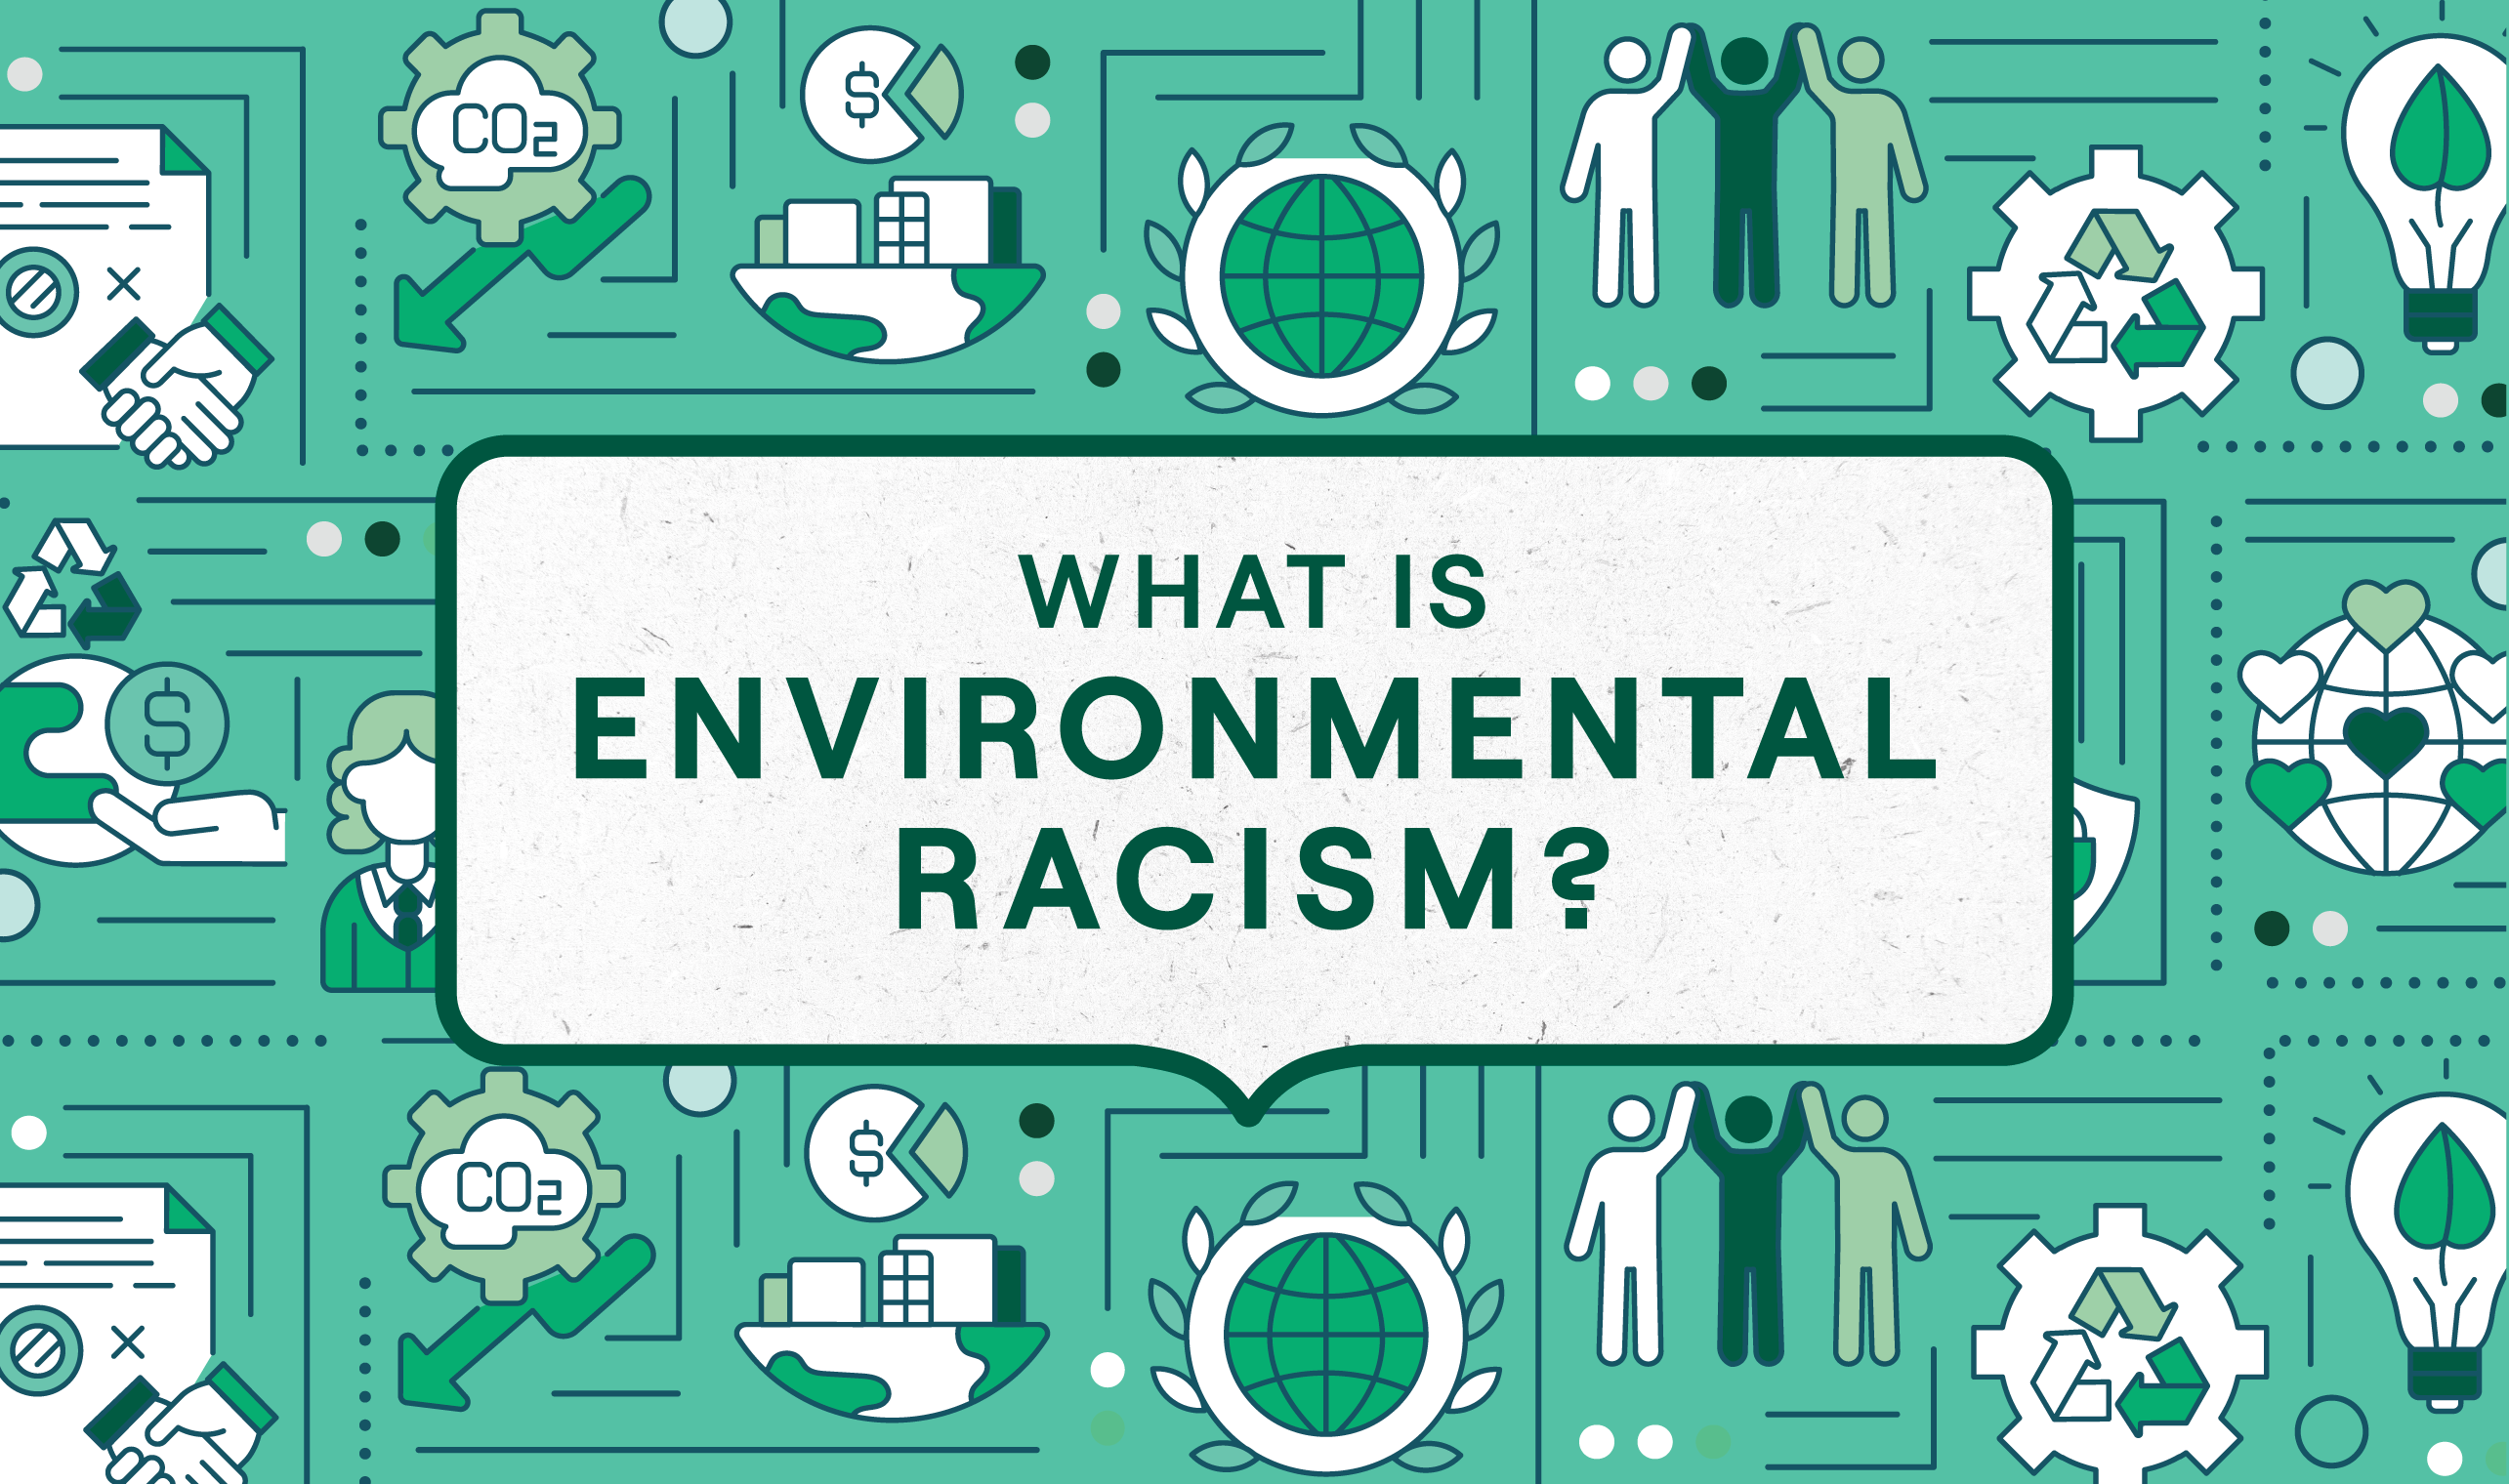 the environmental racism thesis falls within which theoretical approach